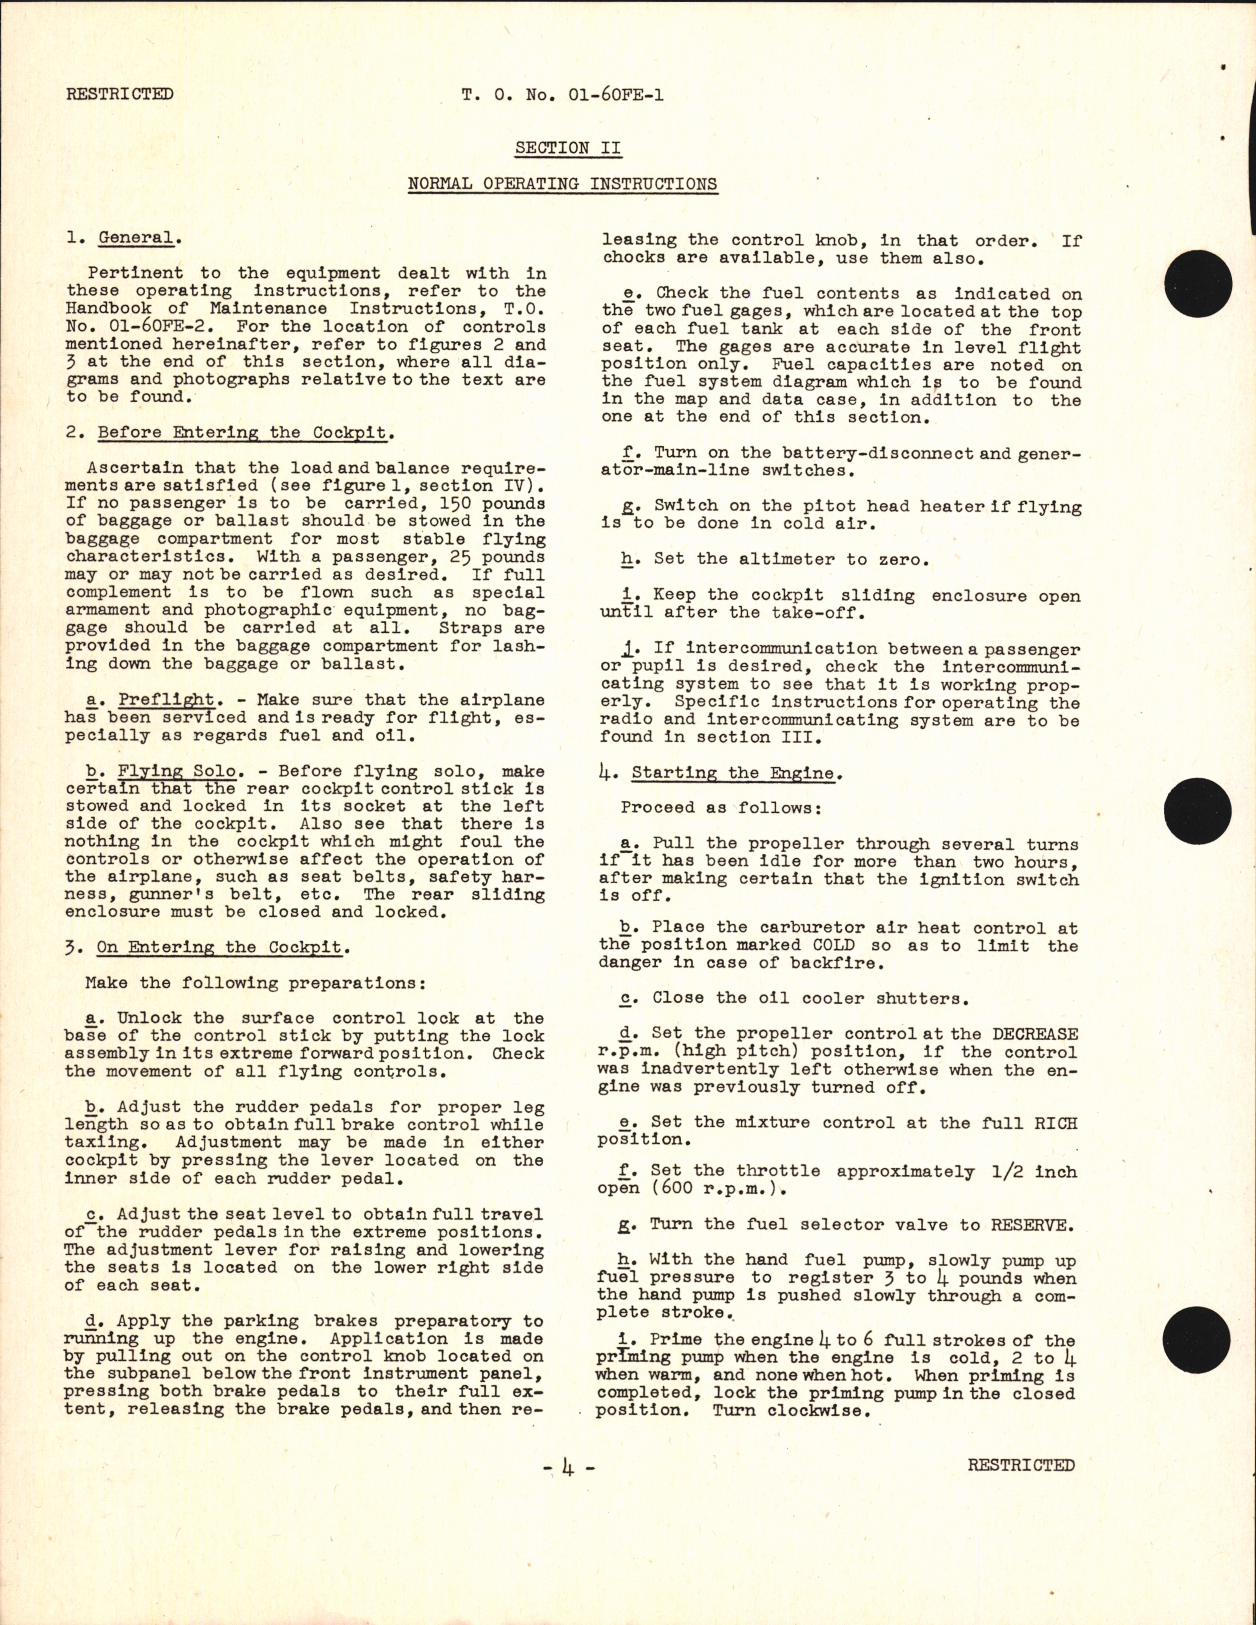 Sample page 6 from AirCorps Library document: Operation and Flight Instructions for AT-6C and SNJ-4 Training Airplanes